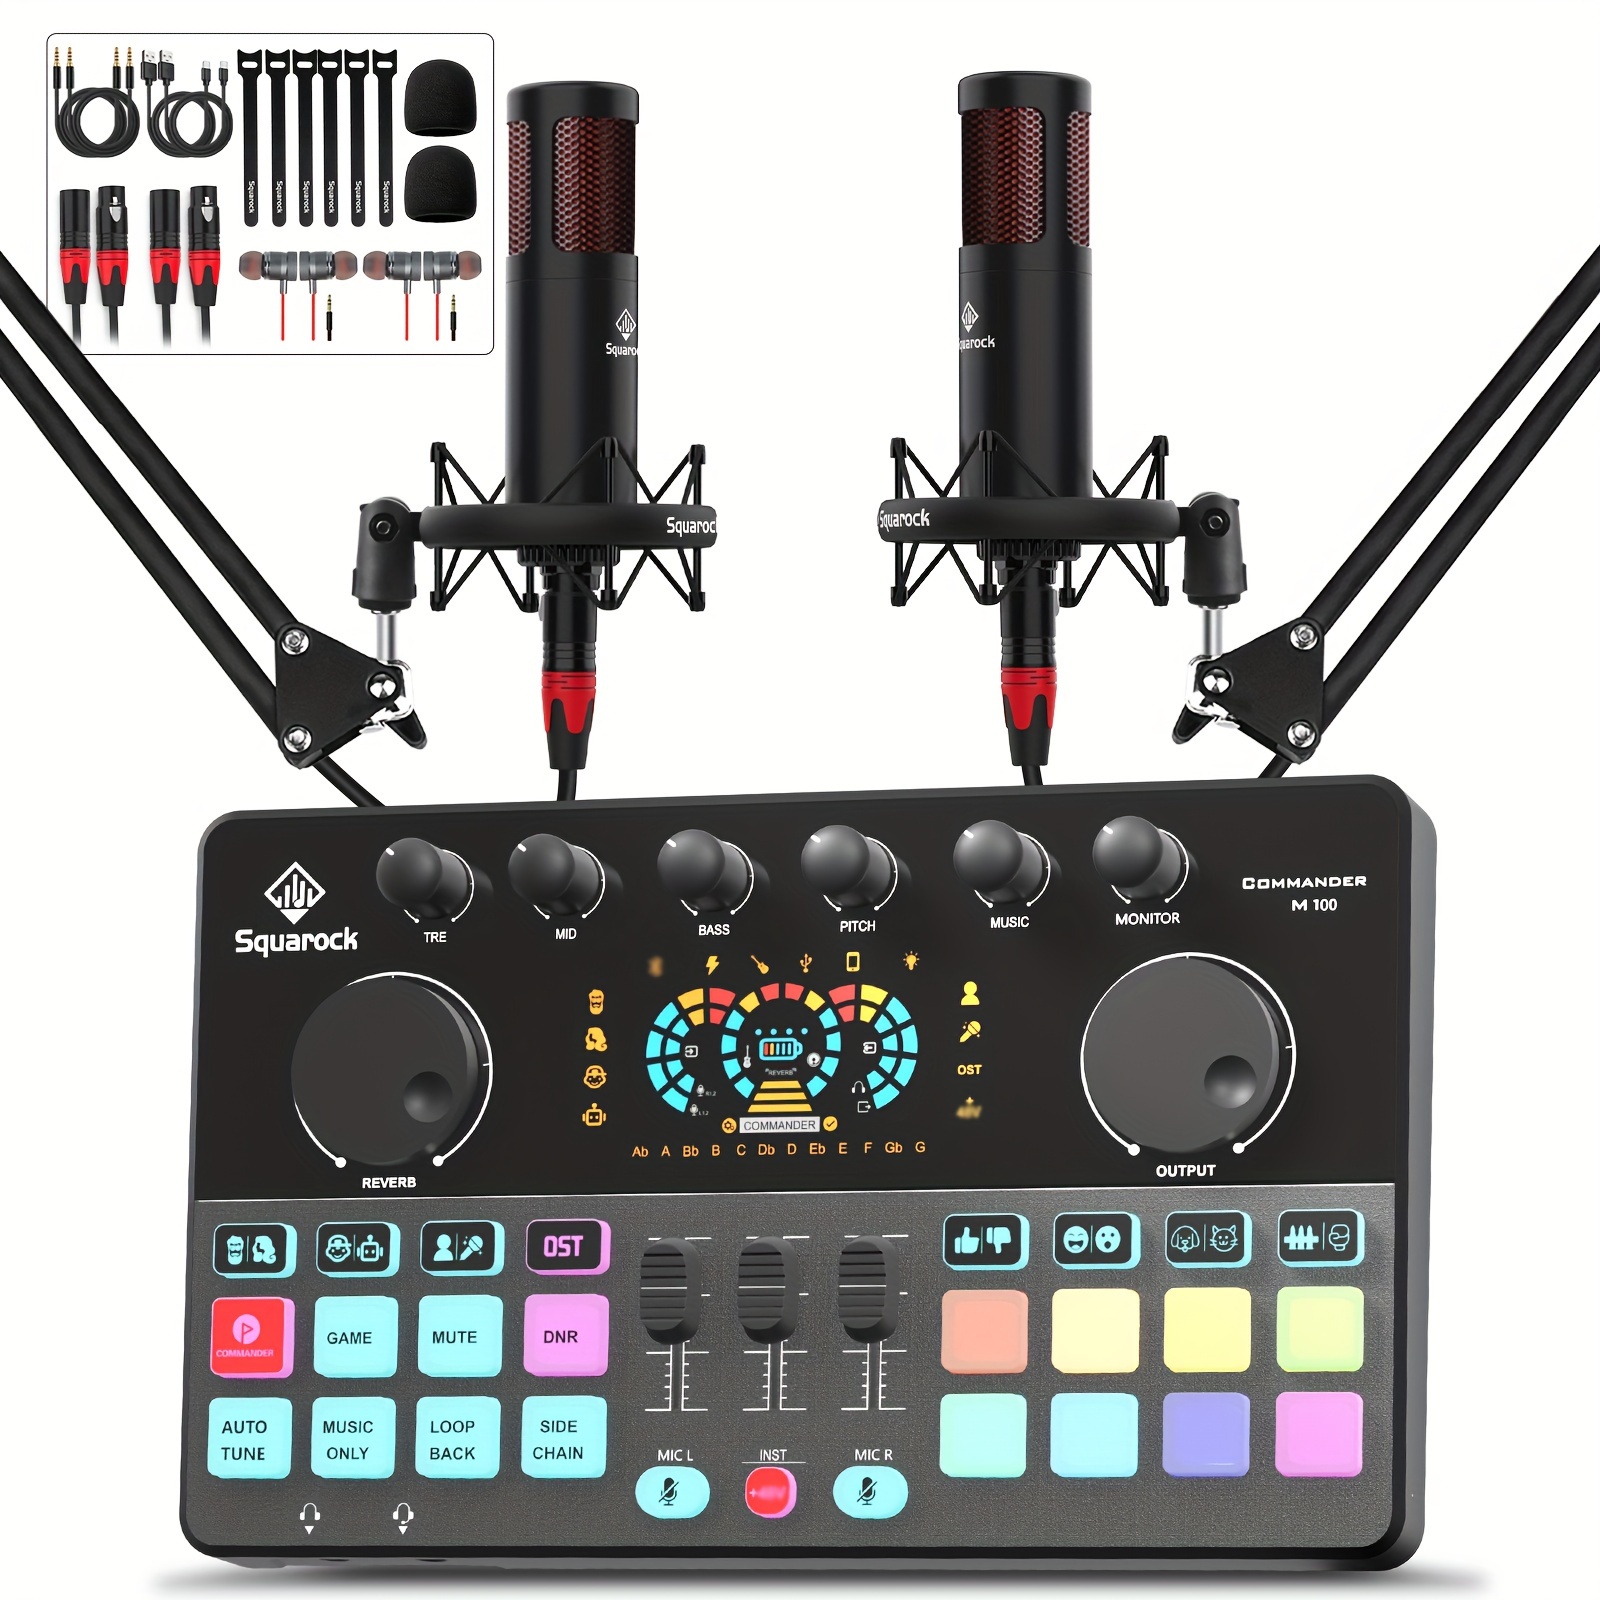 

Podcast Equipment Bundle For 2, Audio Interface Dj Mixer With Studio Microphone For Podcast, Live Streaming, Recording Commander M100